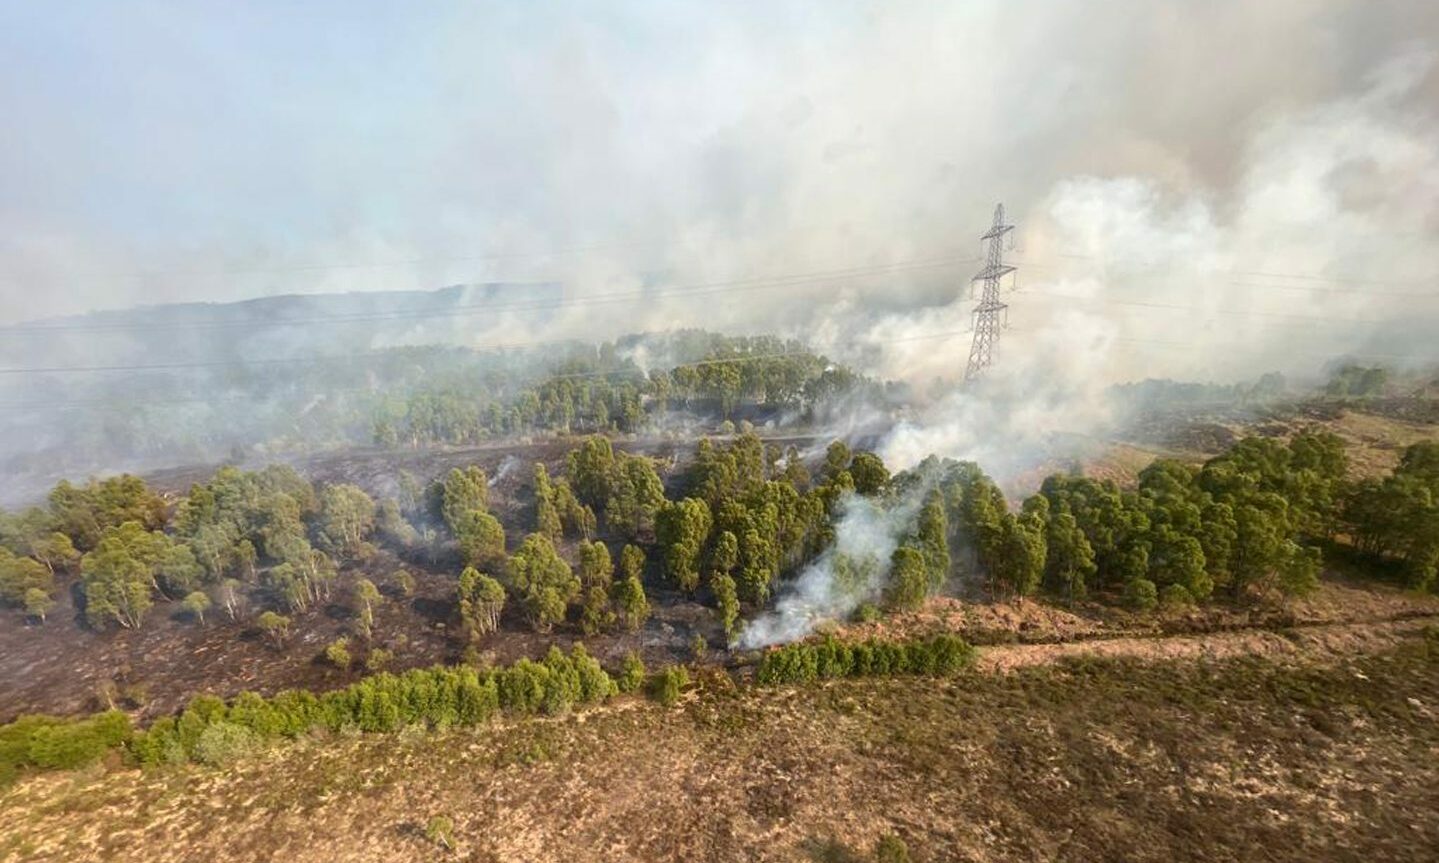 View of Cannich wildfire from a helicopter, showing smoke rising above trees with a powerline running through the forest. 